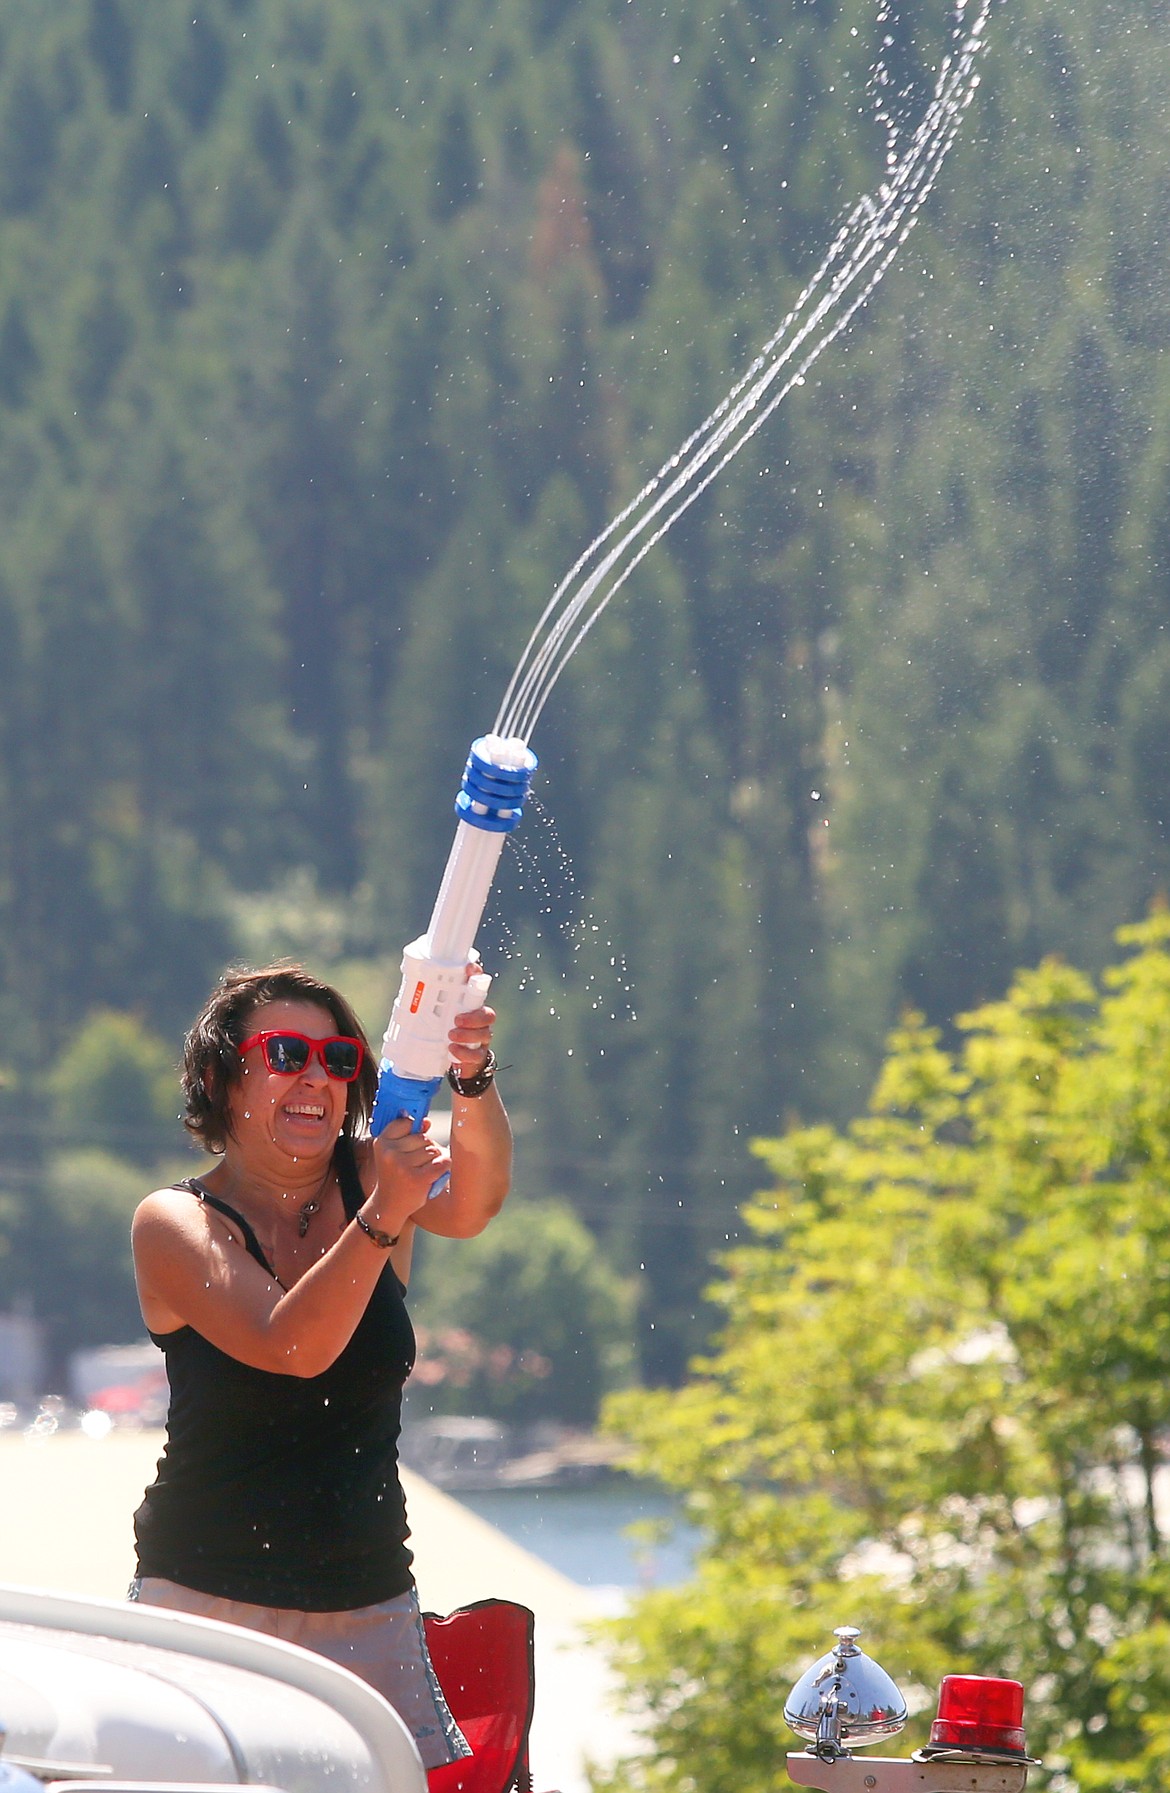 A woman in the Bayview Daze parade sends a stream of water at the crowd.